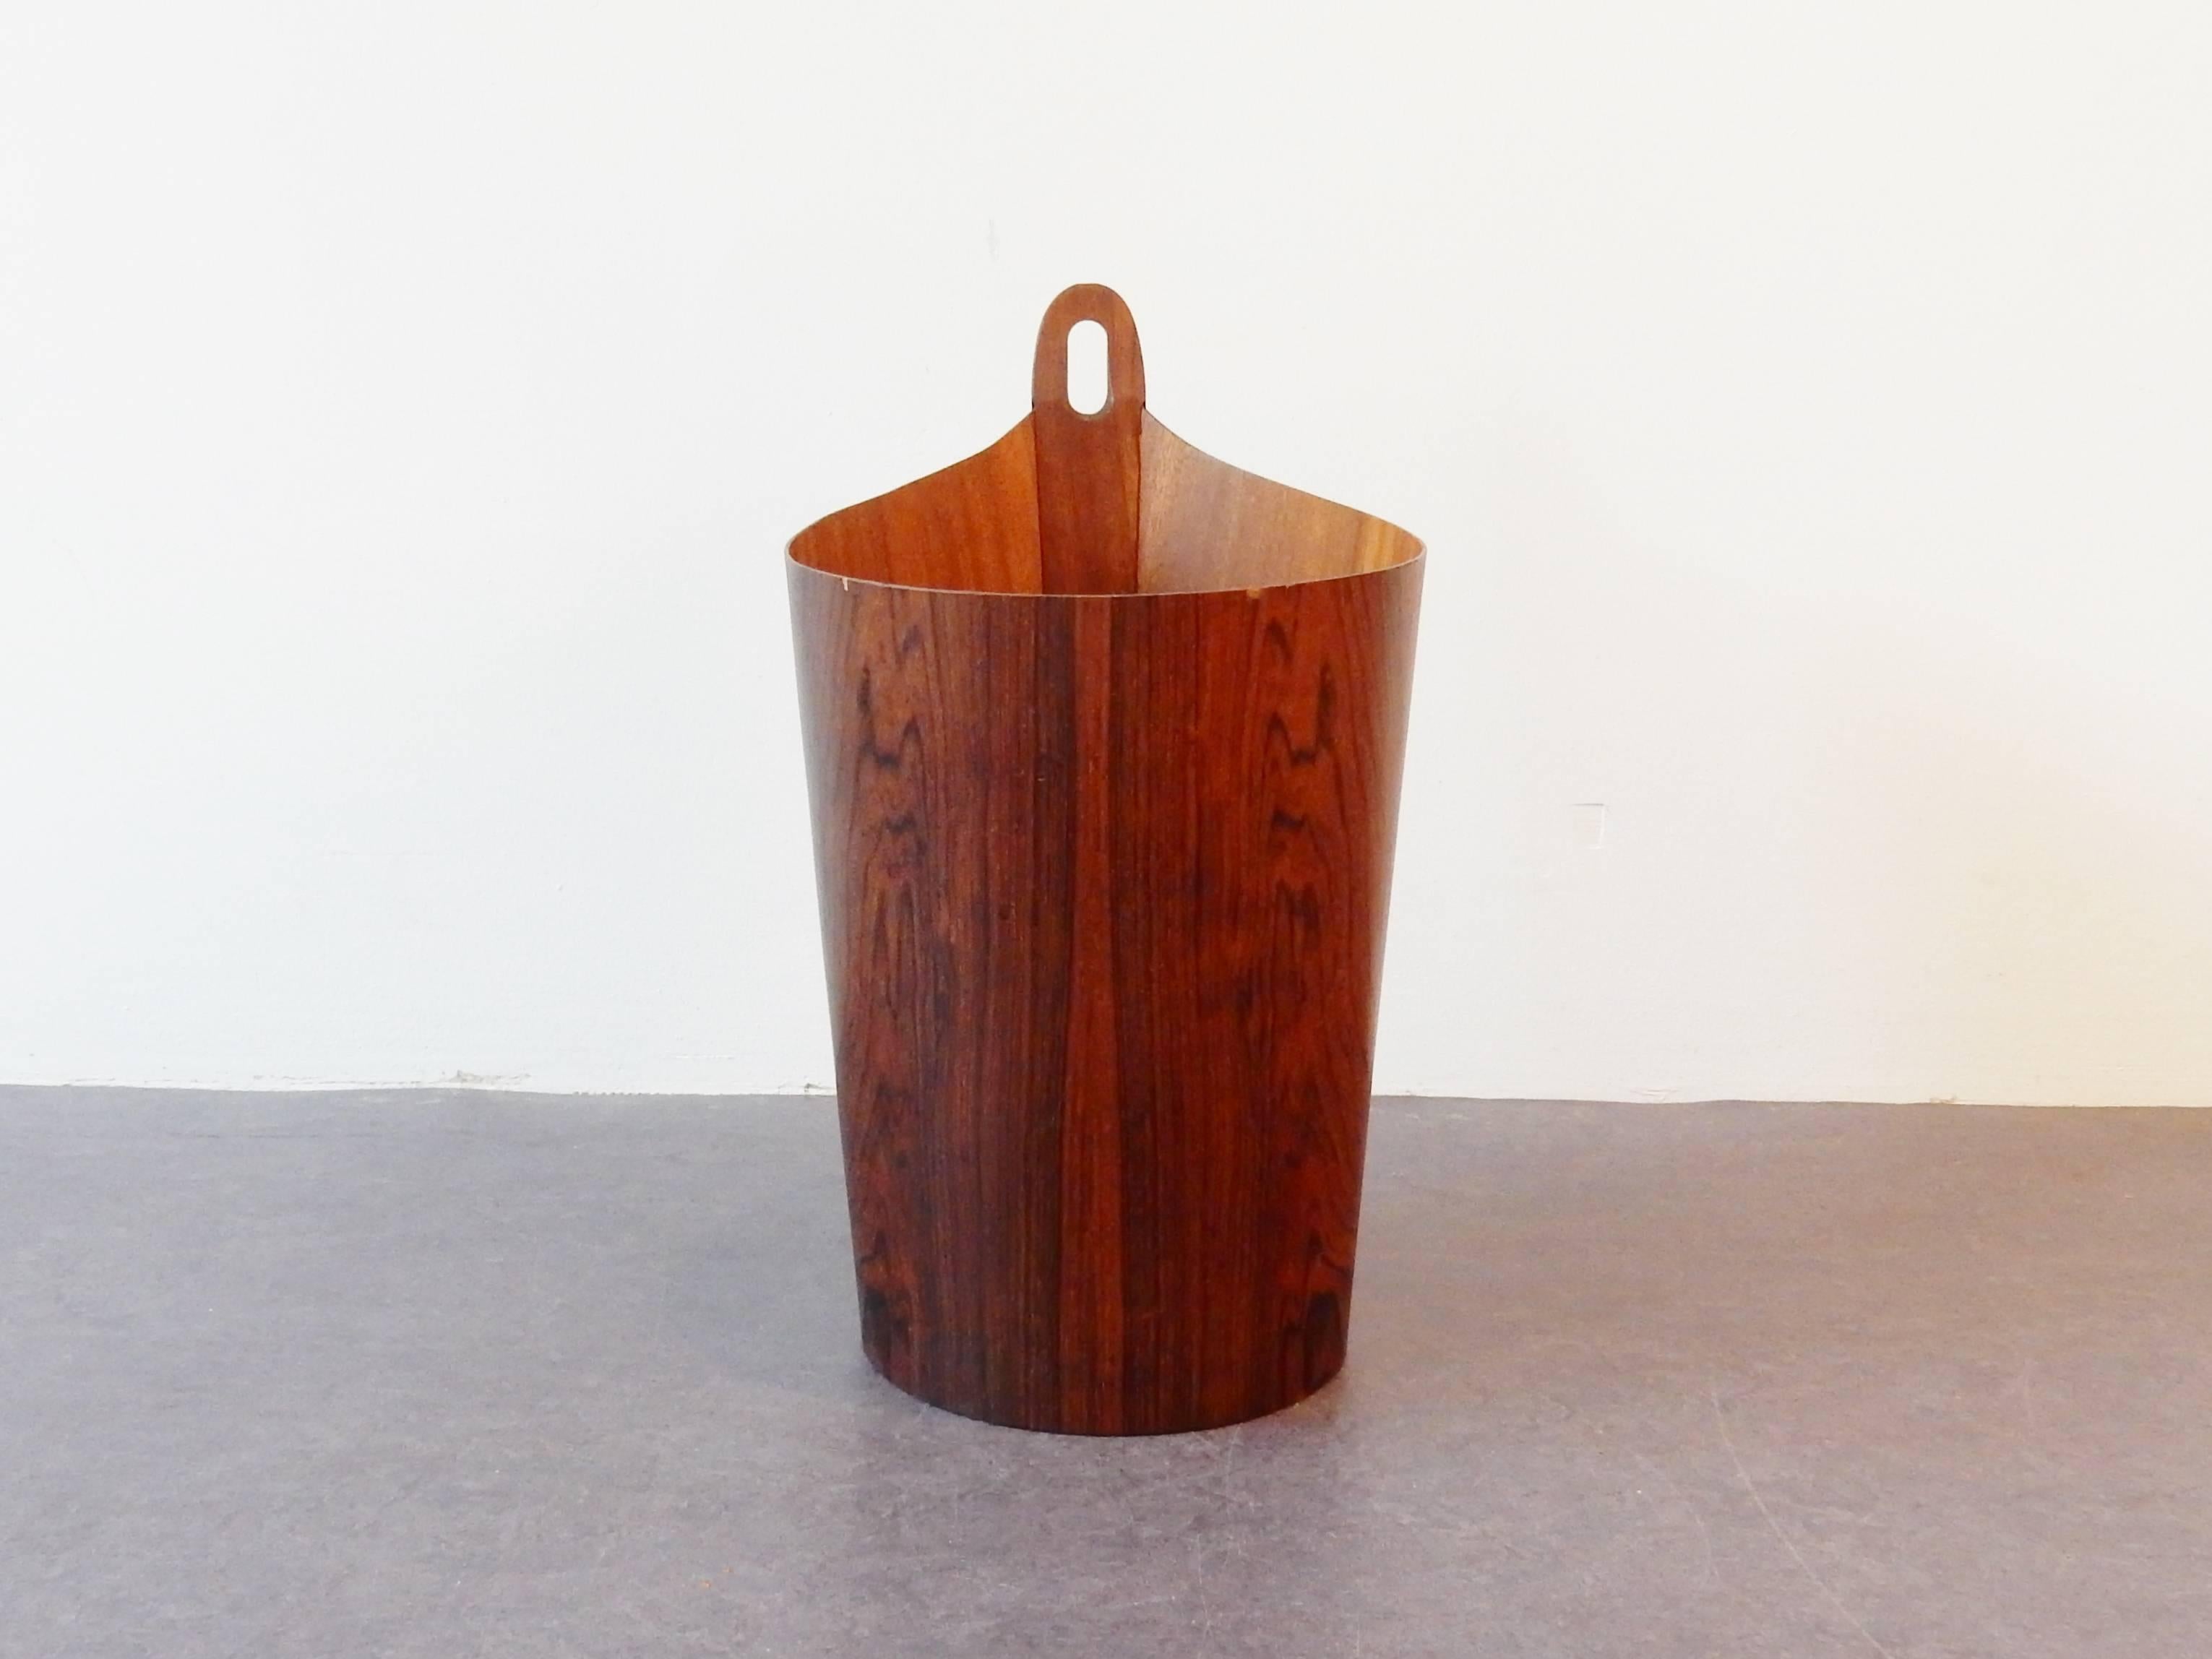 This wastepaper basket is the more rare version of the designs by Einar Barnes for P.S. Heggen from Norway. The basket is in a very good condition considering age and use with some signs of age to the upper edge, some loss of veneer such as